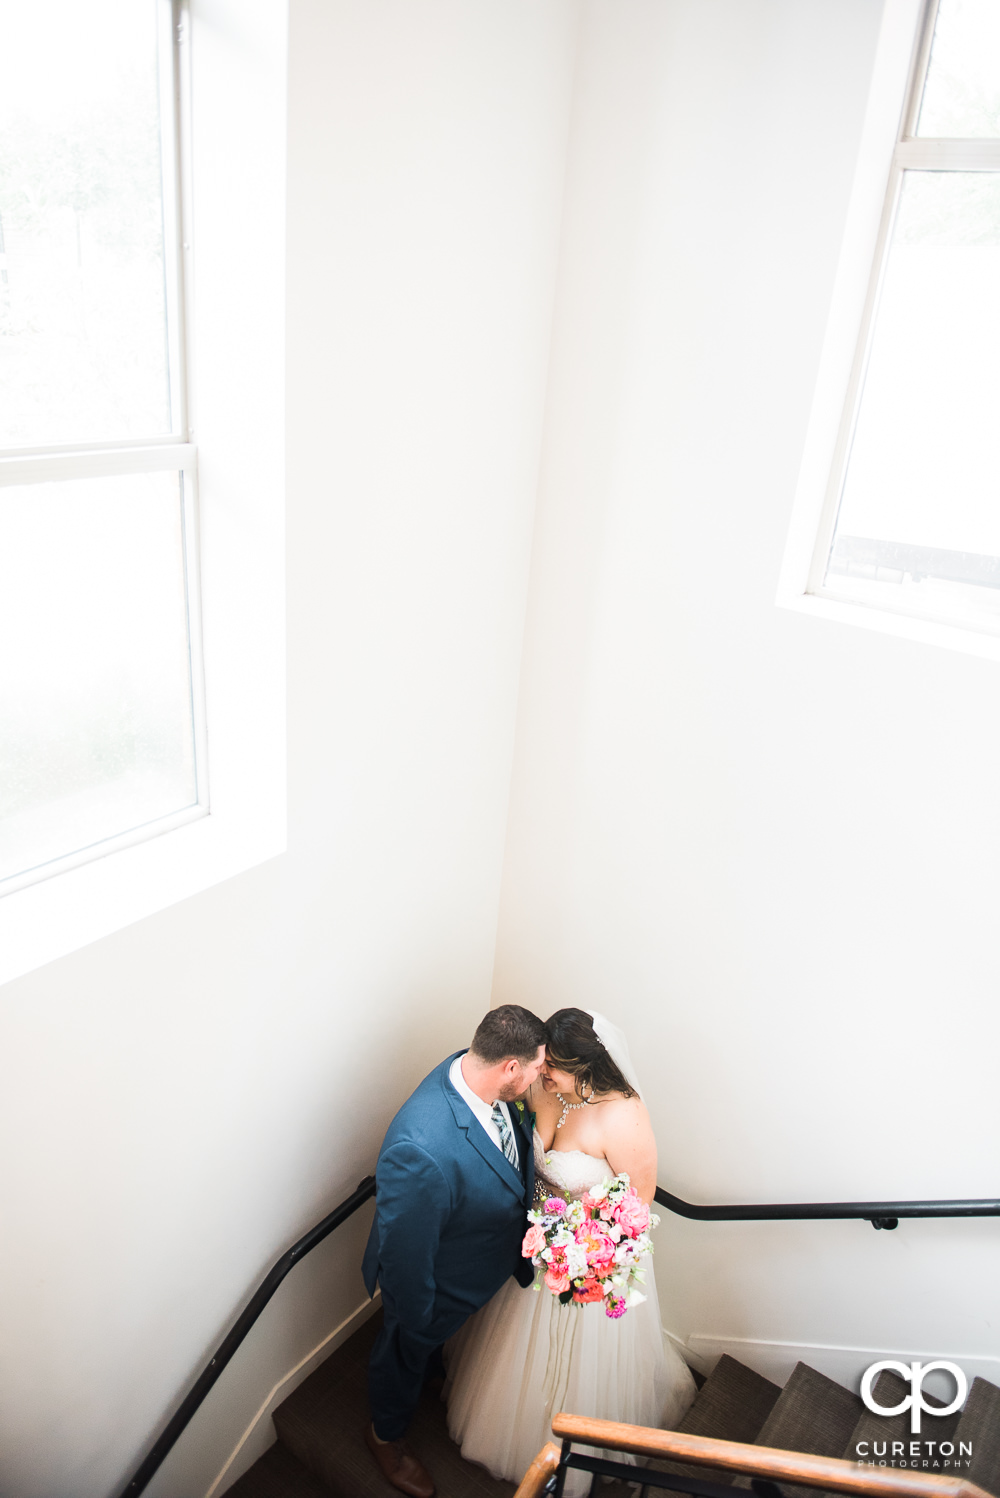 Bride and groom on stairs after their Huguenot Loft wedding in Greenville,SC.